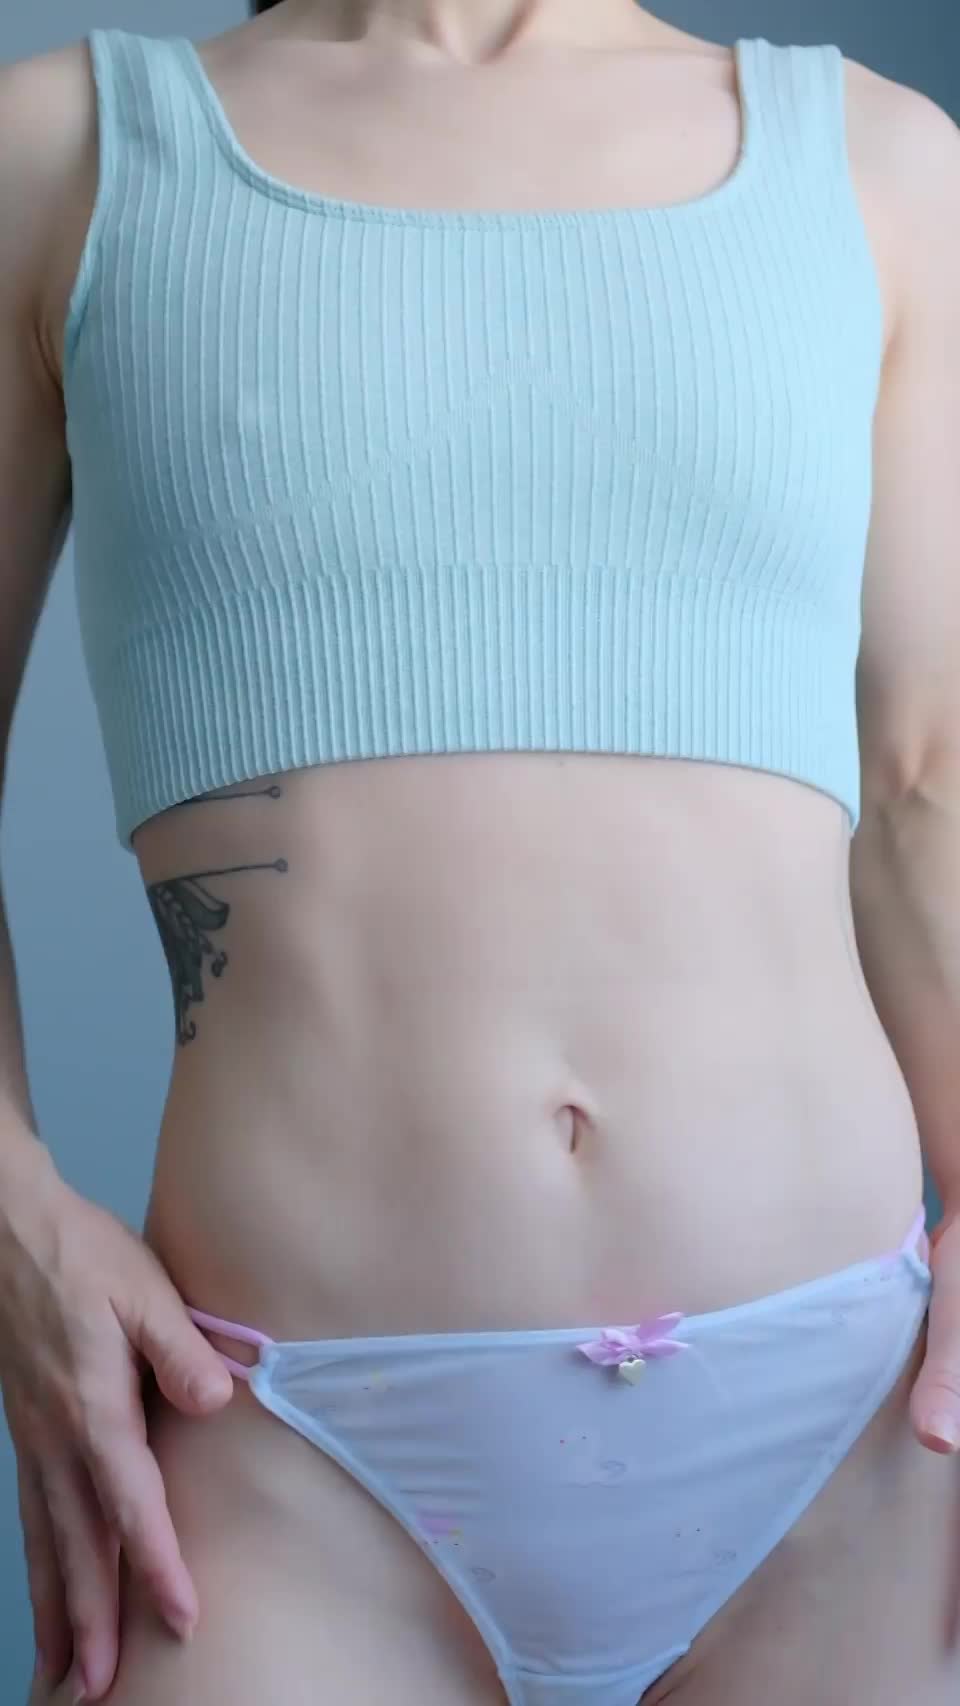 my tiny body needs to be filled with your cum : video clip